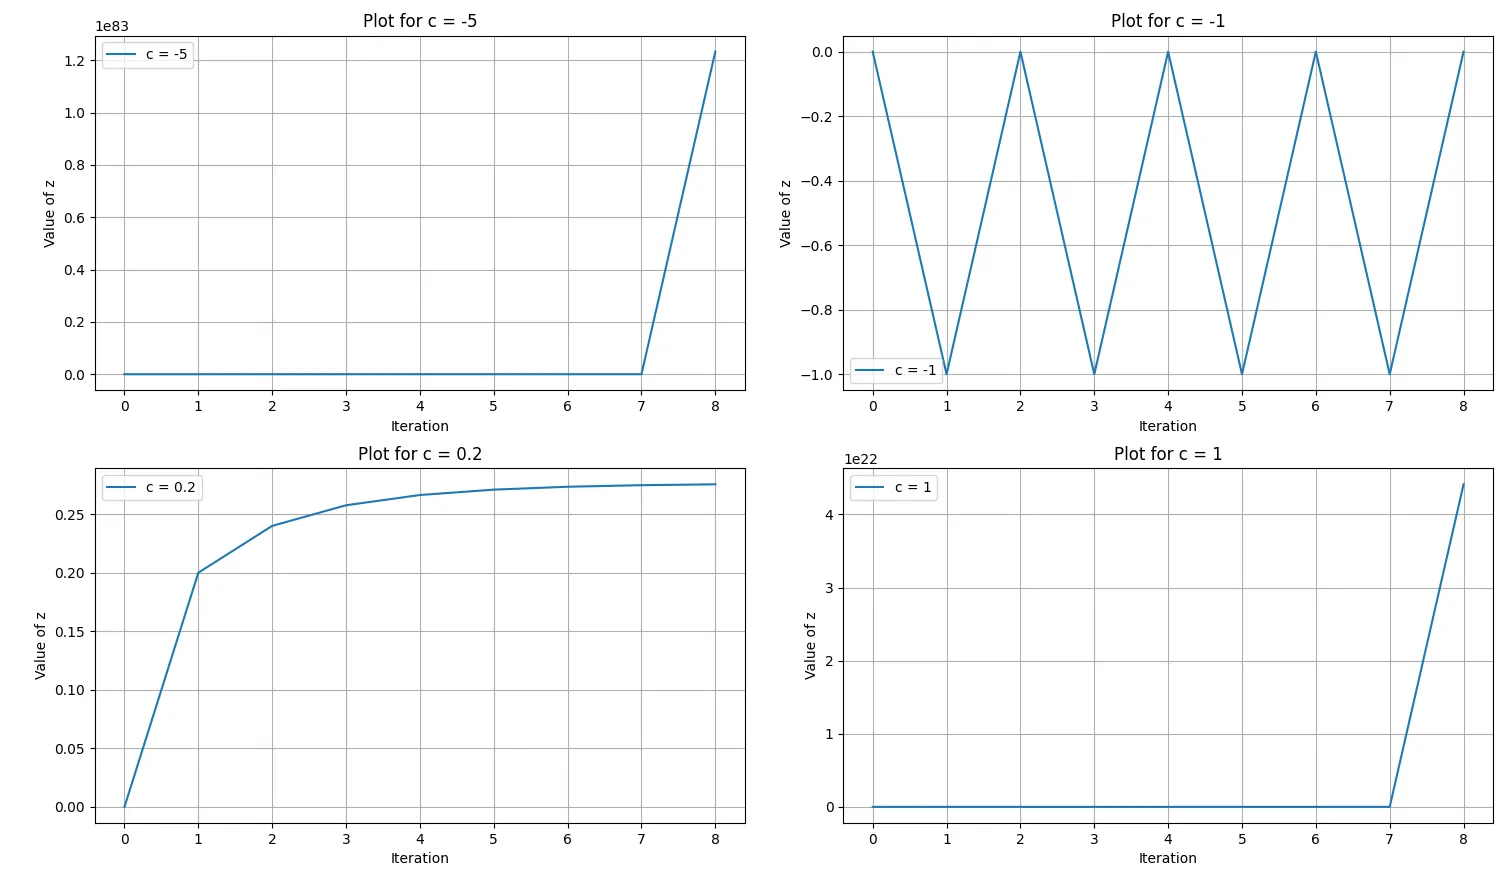 Figure 2. Function Value Distributions Depending on C for 8 Iterations